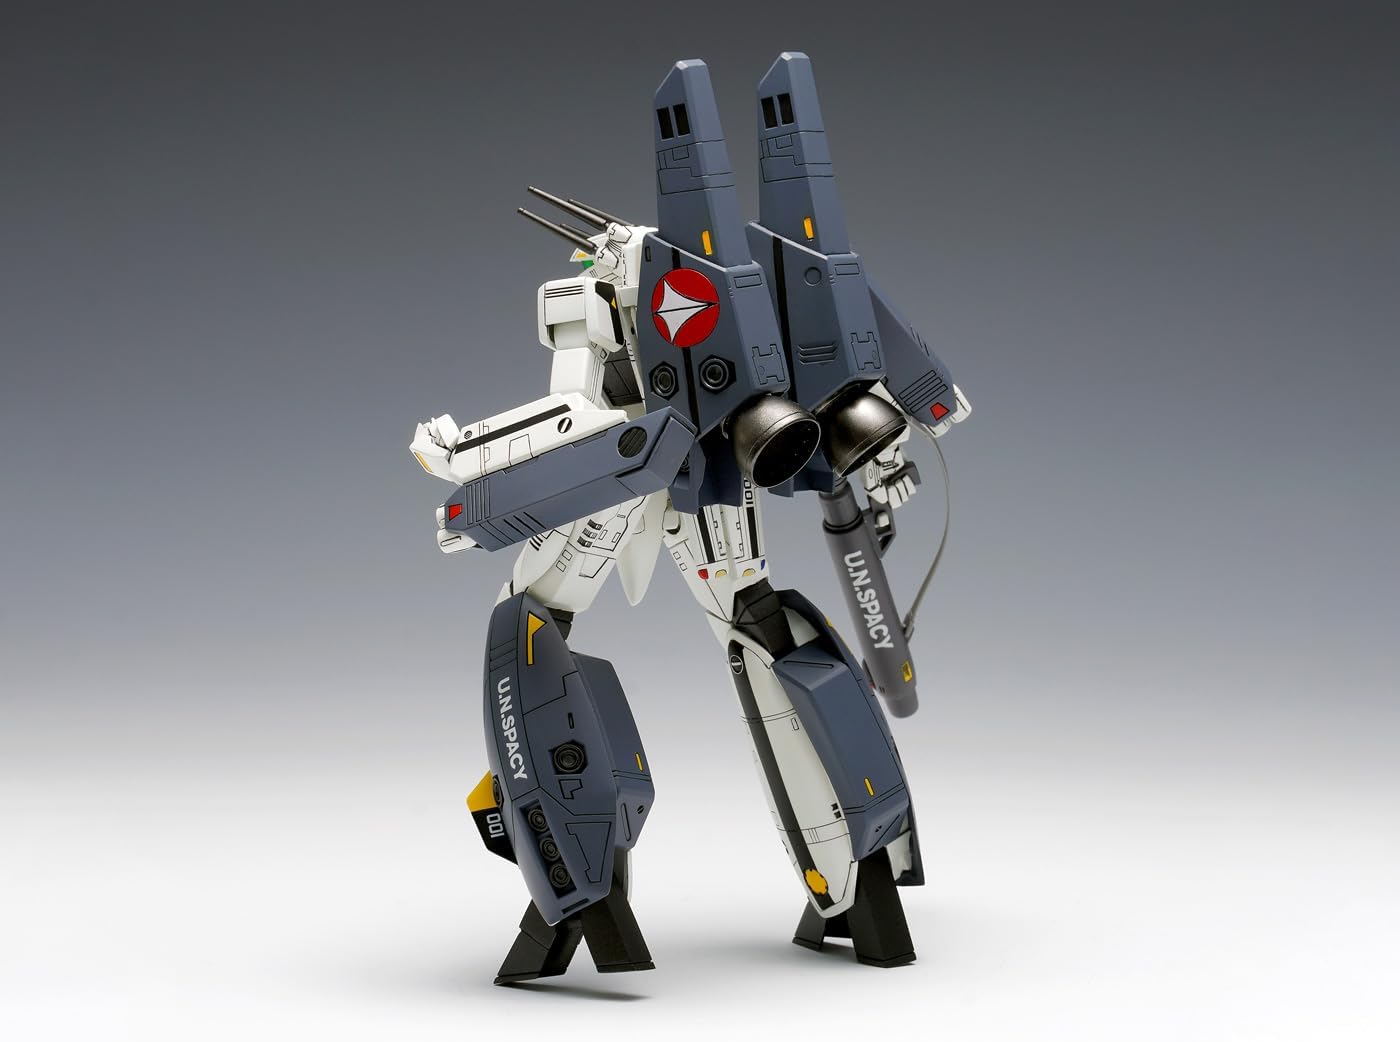 Wave MC-068 Macross VF-1S/A Super Valkyrie Battroid, 1/100 Scale